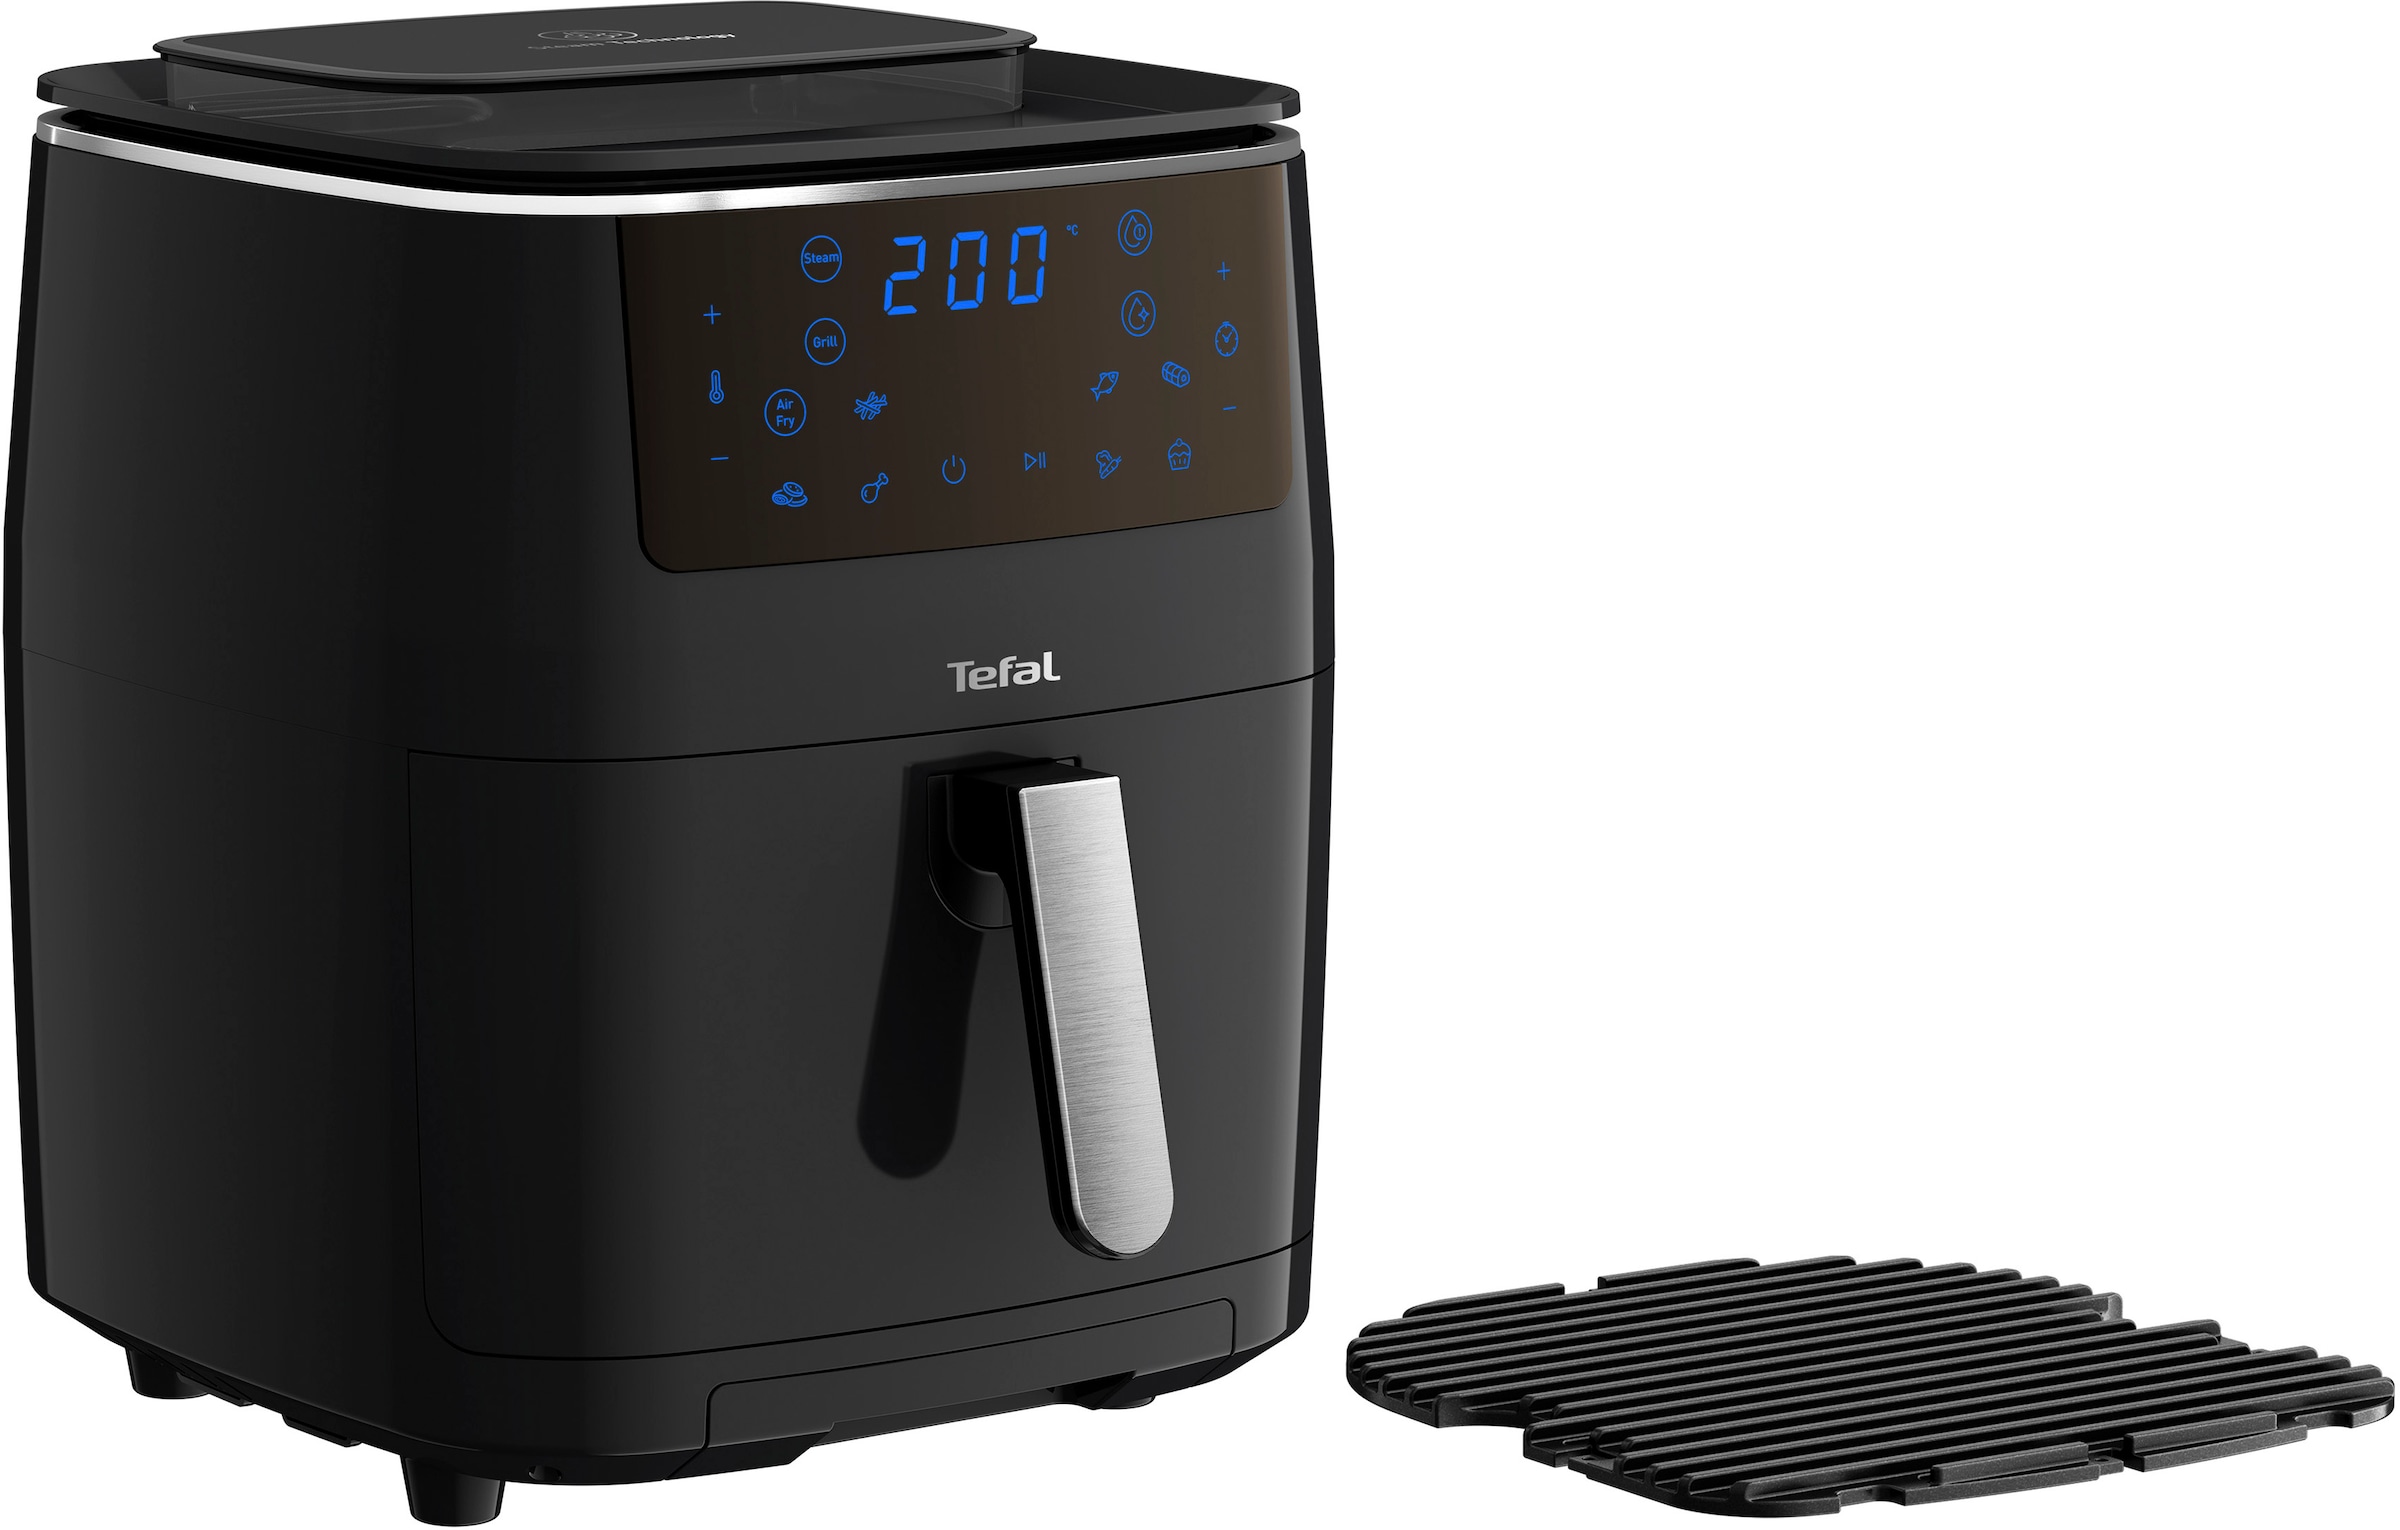 Tefal Heißluftfritteuse »FW2018 Easy Fry Grill & Steam«, 1700 W, Grill + Dampfgarer, 7 automatische Programme, 6,5 Liter, Timer